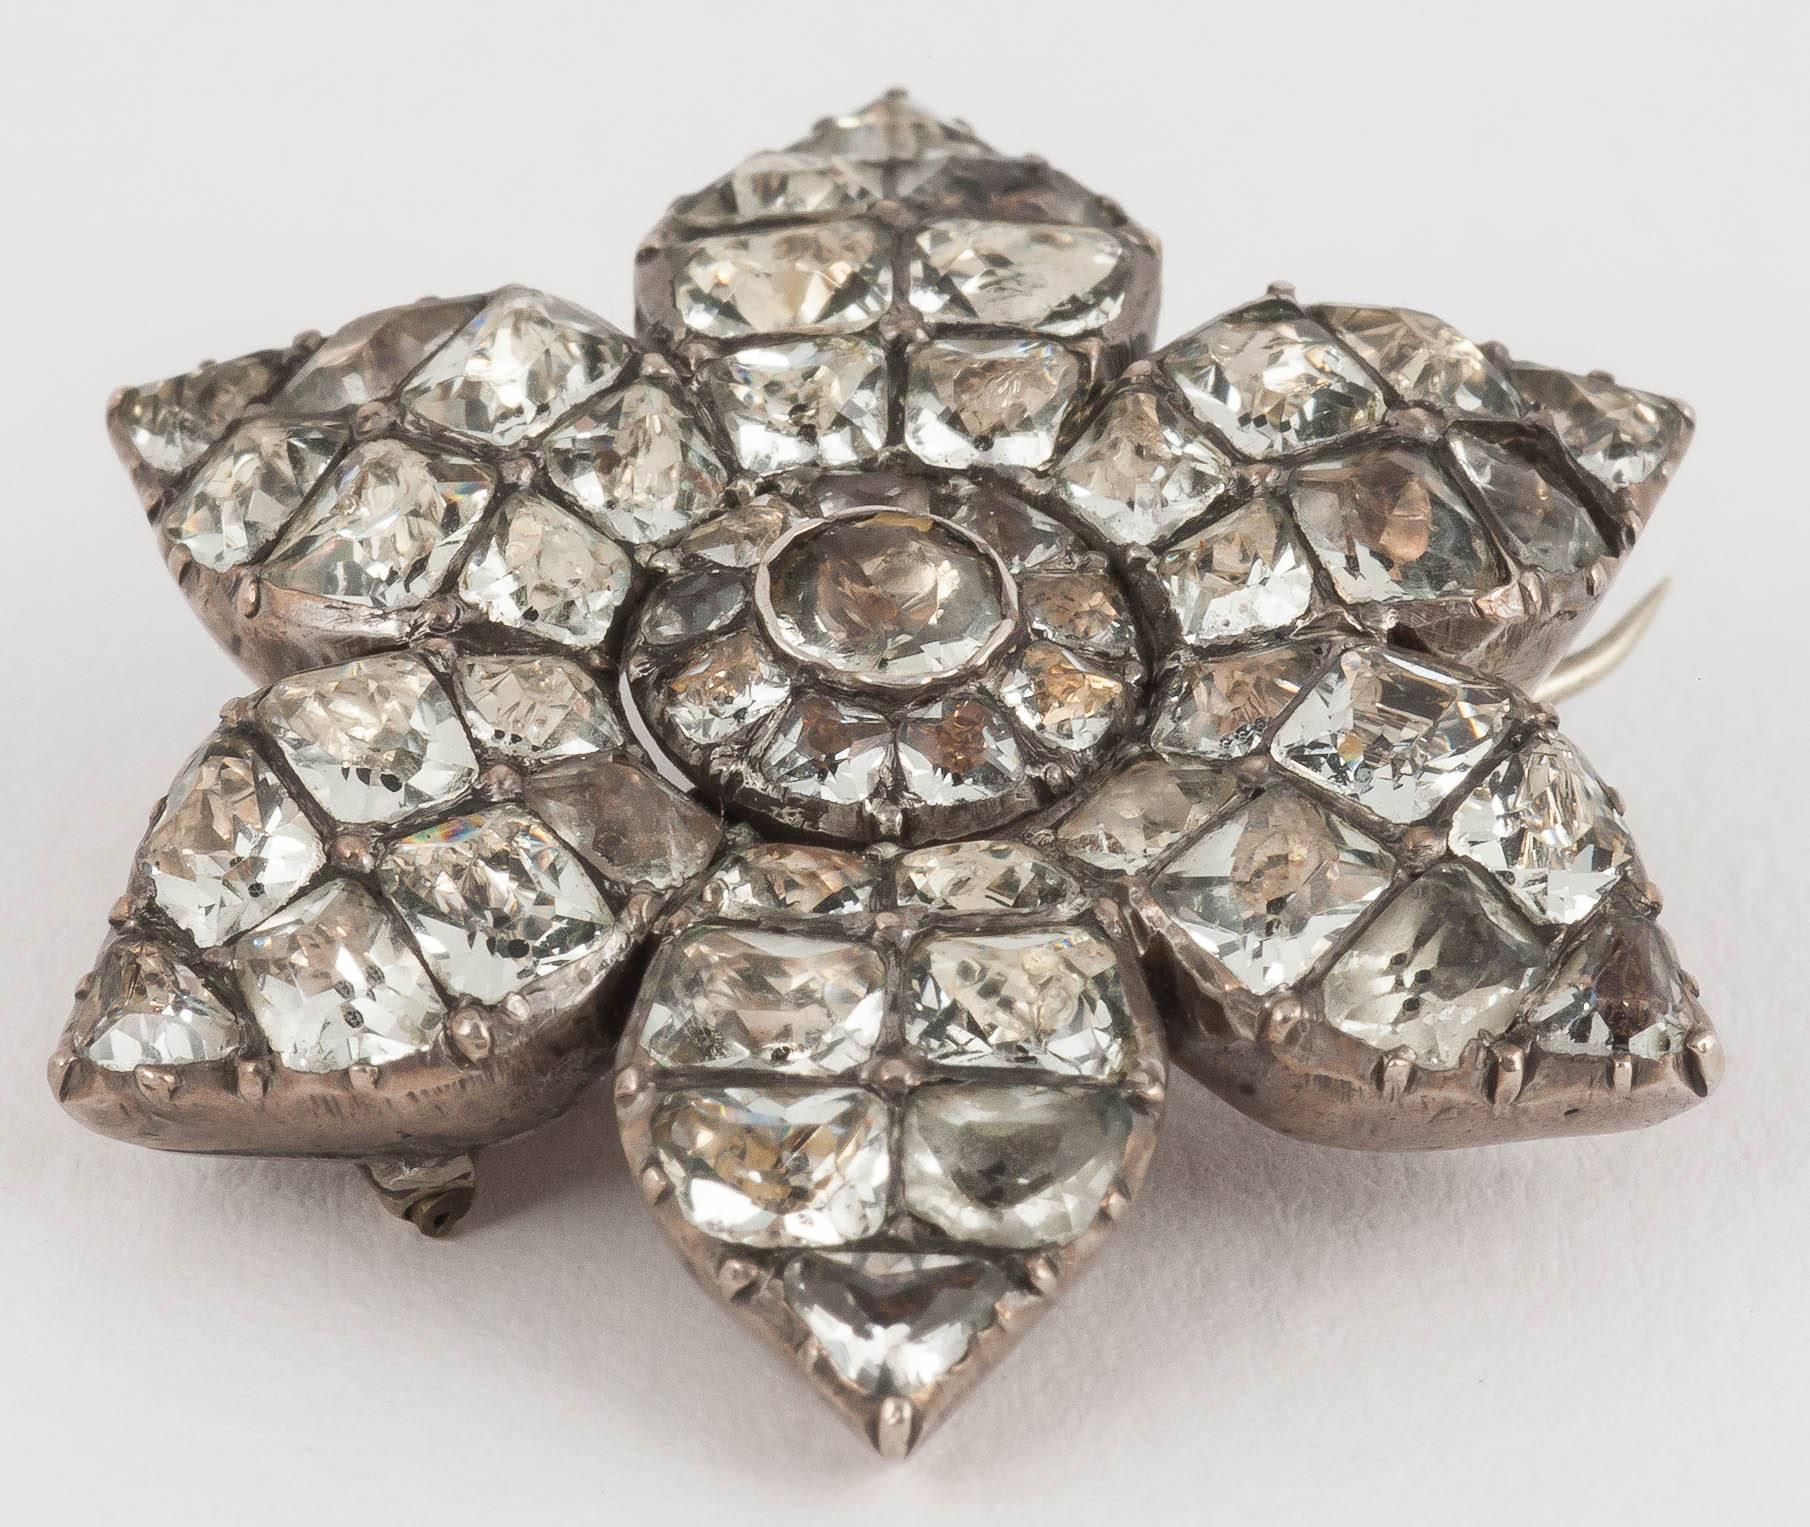 A rare antique brooch in the design of a flower dating from the reign of George III. The design has six petals, it is set with shaped and foiled white pastes and mounted in silver. The paste is in excellent condition. The brooch fitting is a later